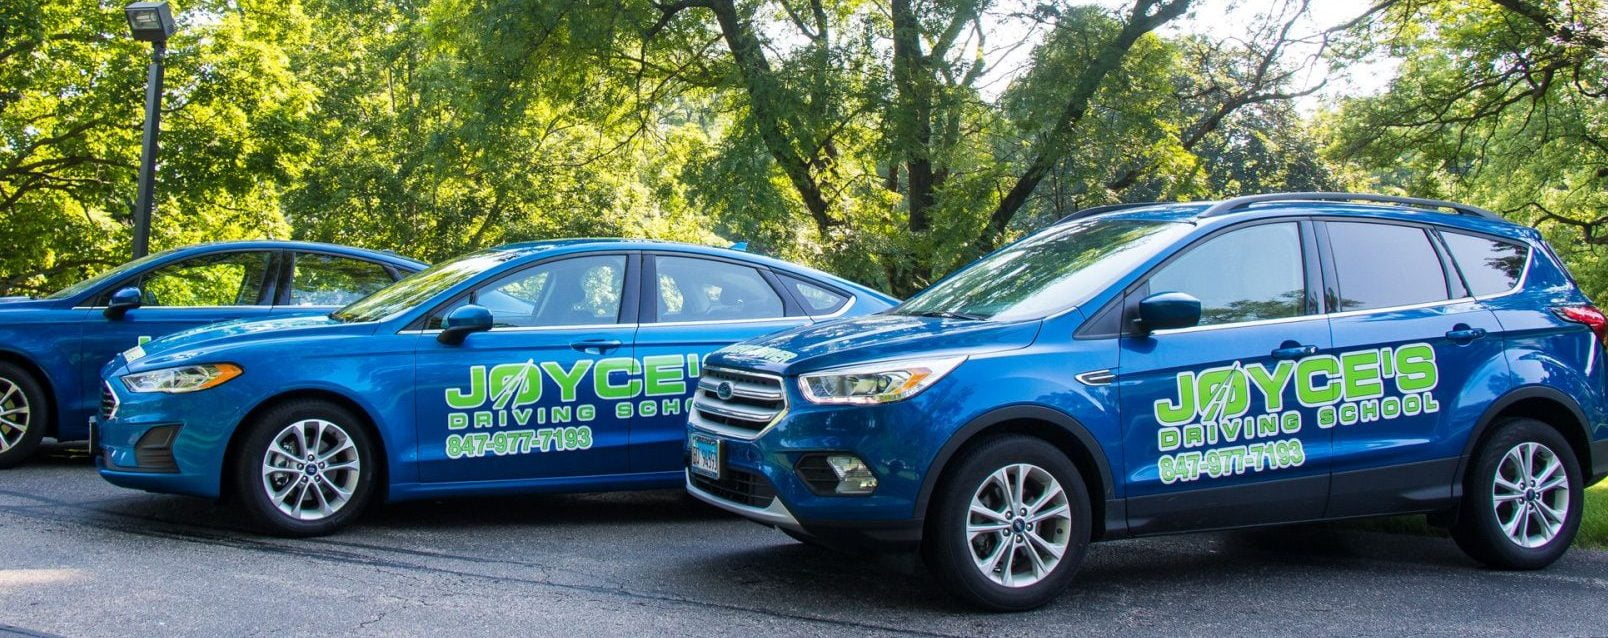 Joyce's Driving School offers a variety of programs for both teens and adults in Palatine, Illinois including Behind-the-Wheel and classroom training.